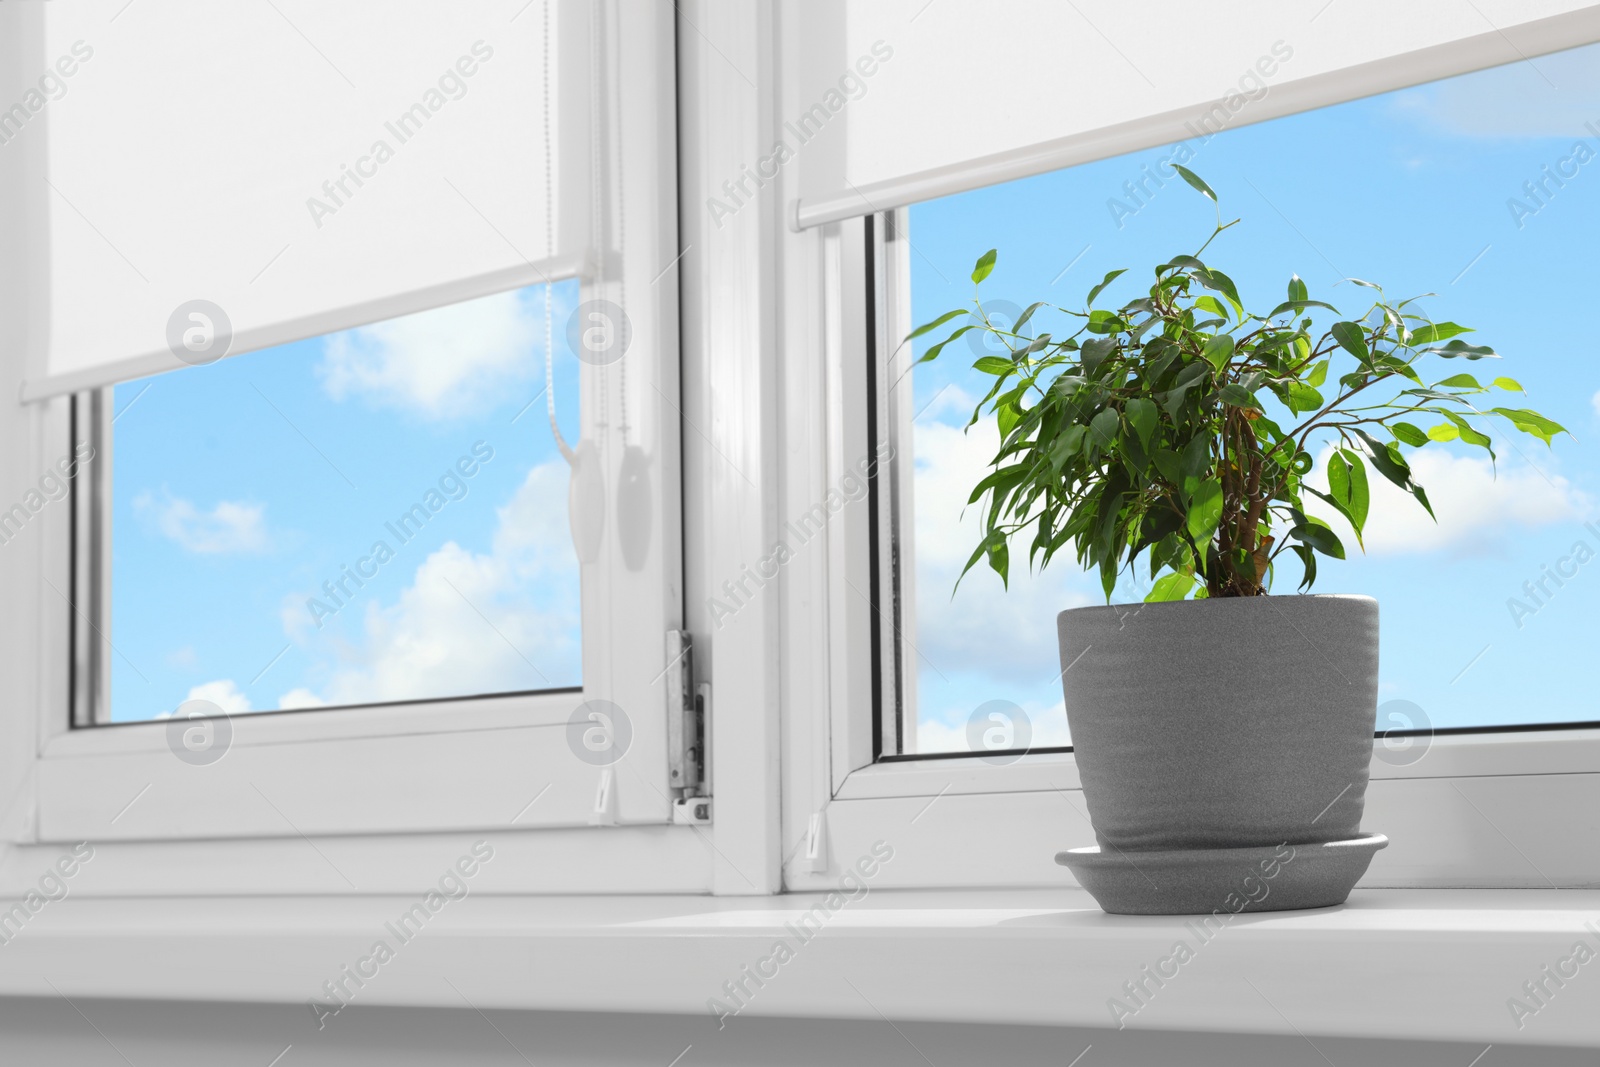 Photo of Green houseplant near window with white roller blinds indoors